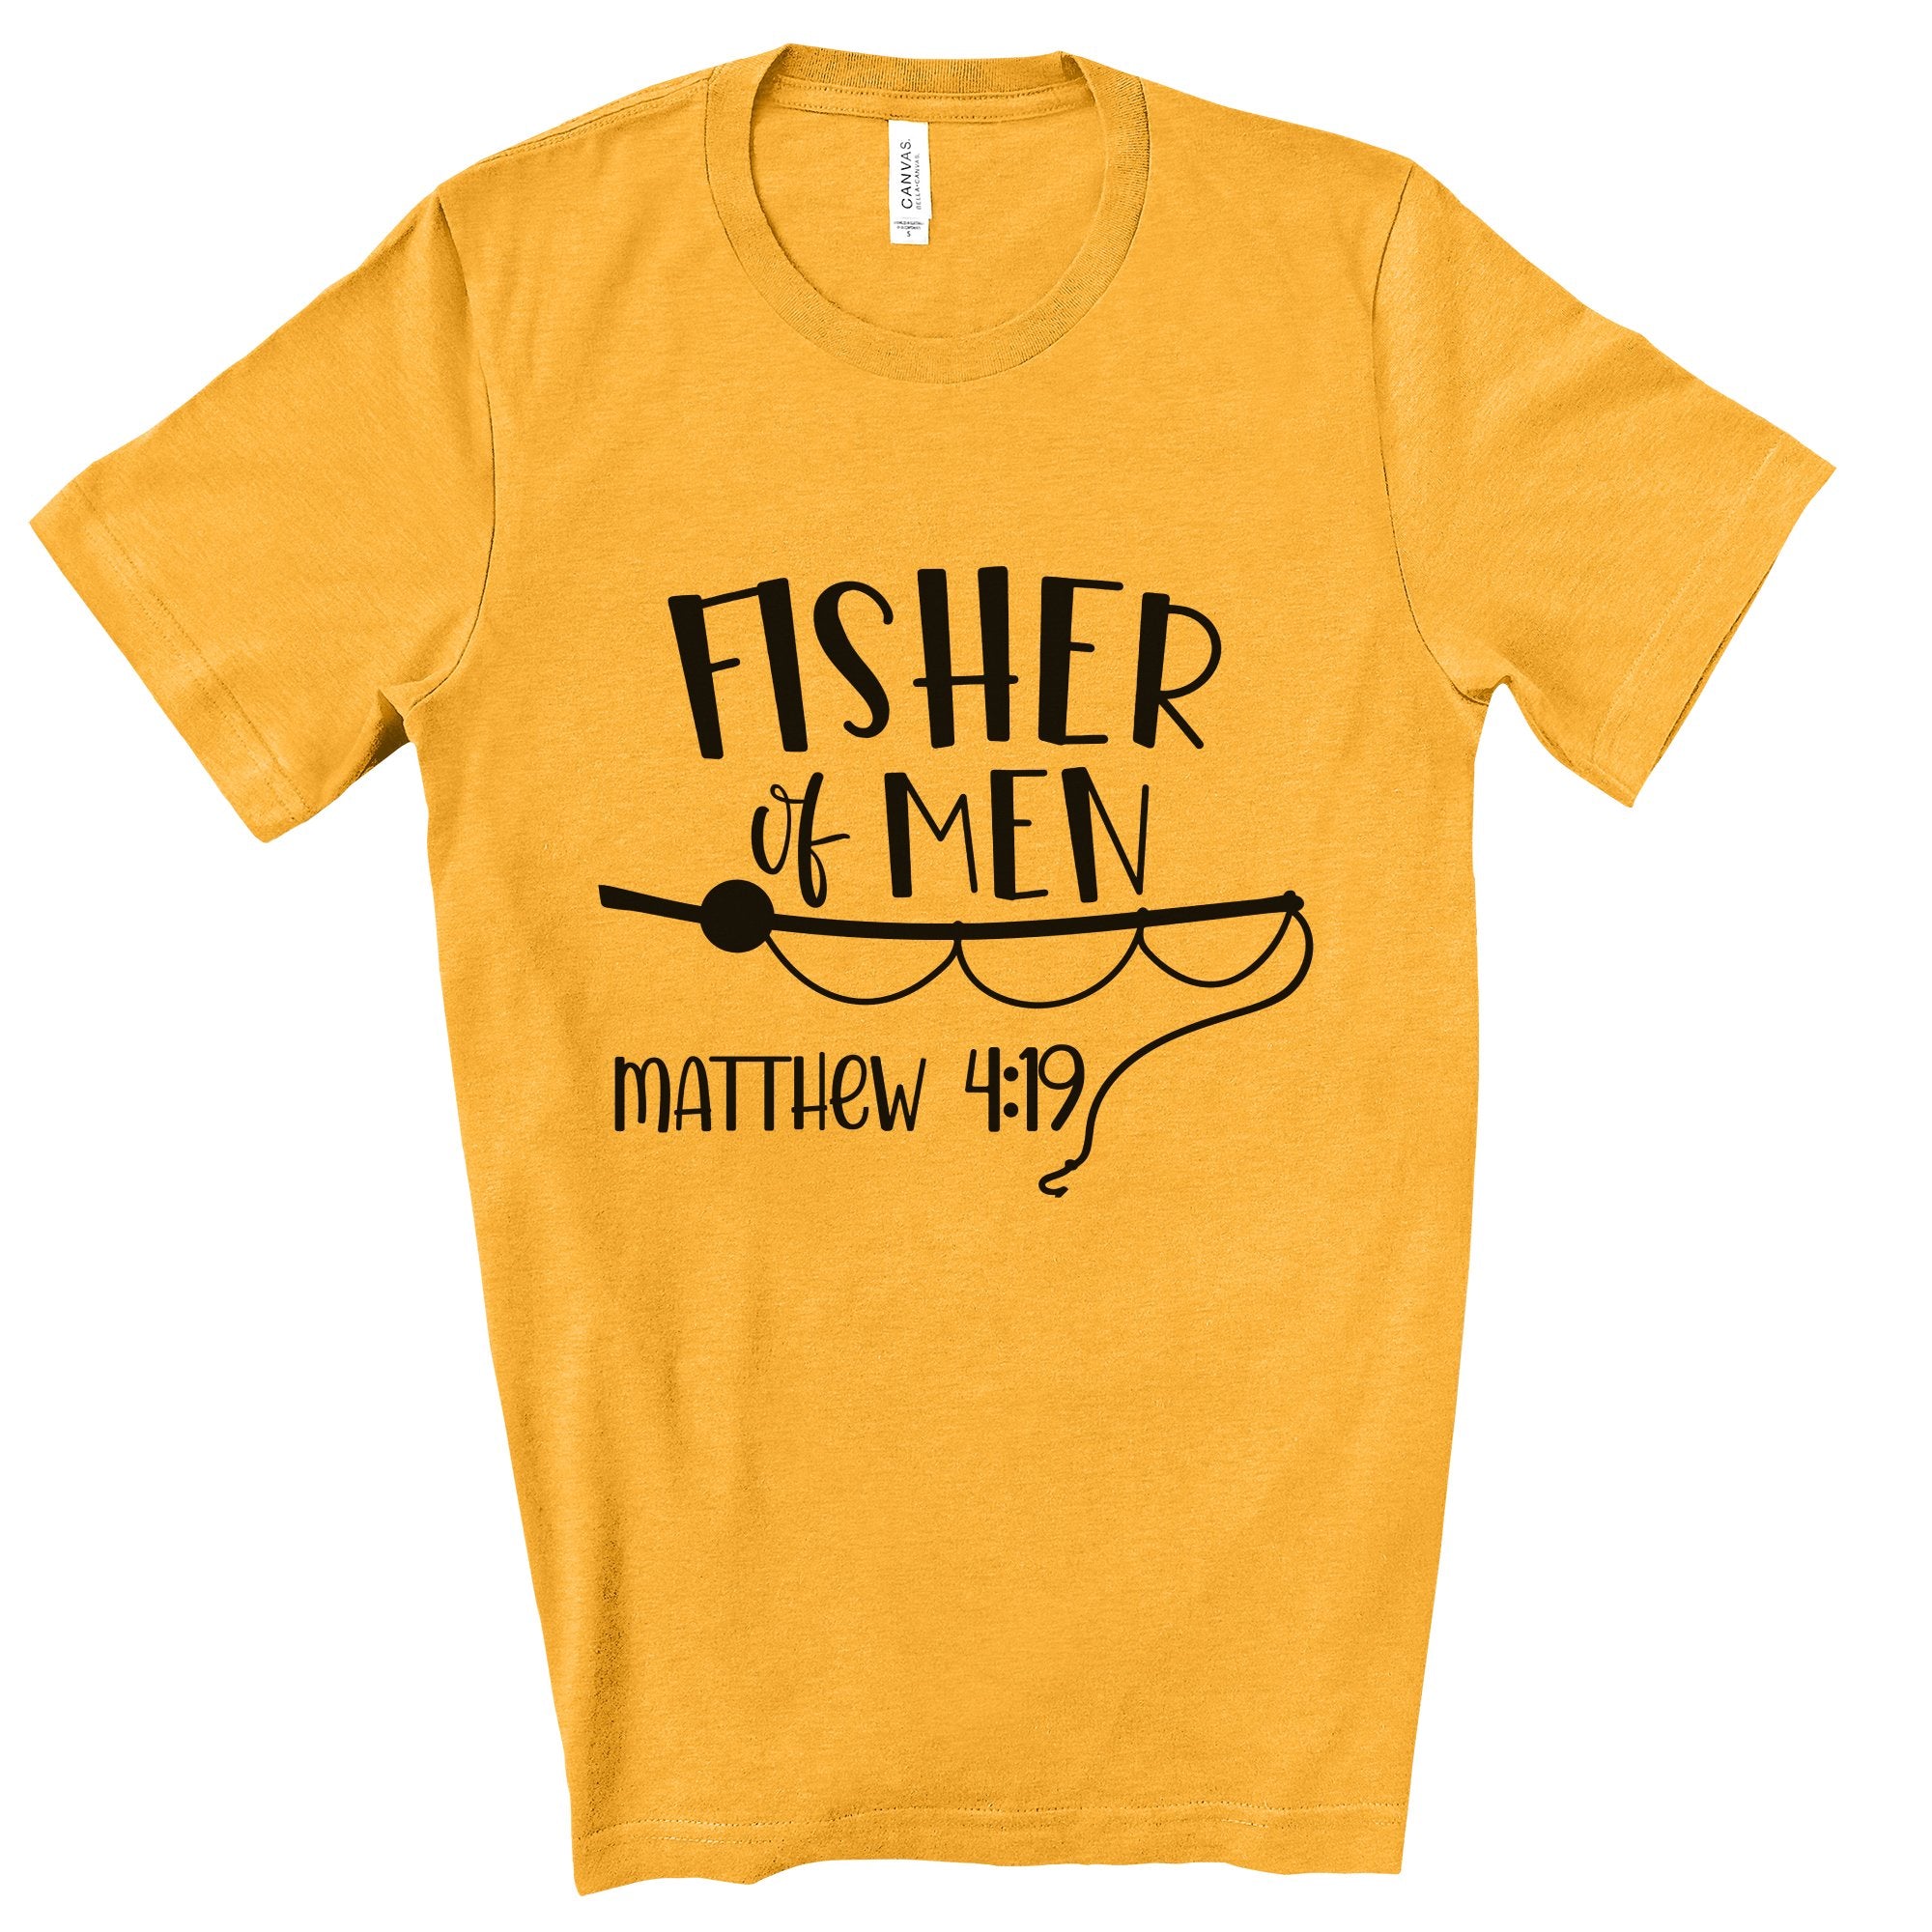 Fisher of Men Men's Jersey Short Sleeve Tee Size: XS Color: Gold Jesus Passion Apparel